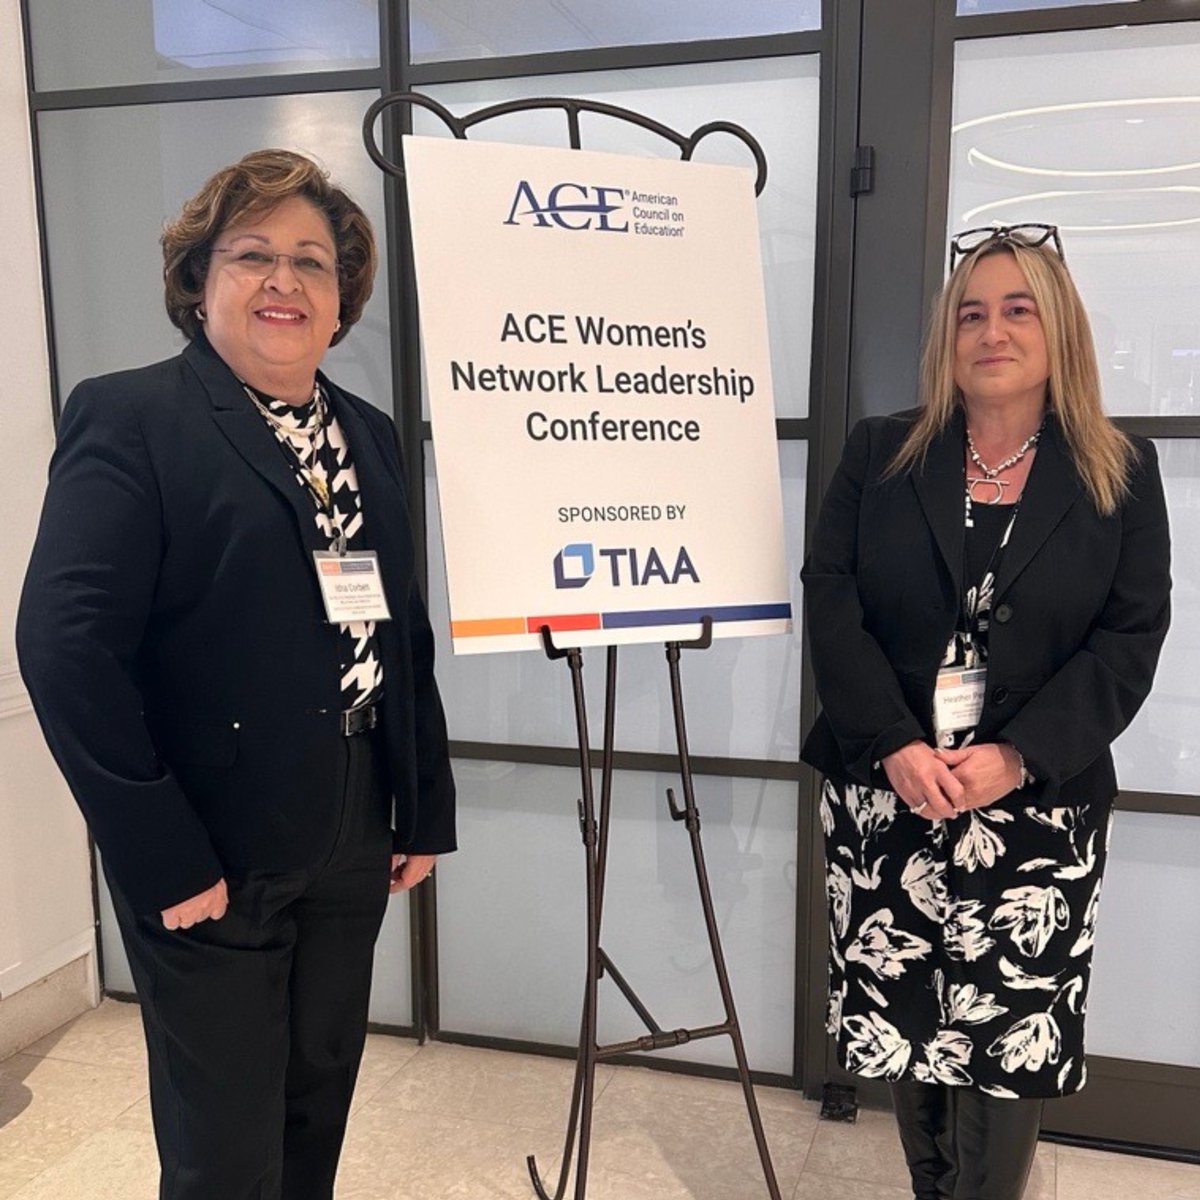 MSCHE President Heather Perfetti and Senior Vice President for Accreditation Relations and Services Idna Corbett attended the 2024 @ACEducation Women's Network Leadership Conference today in Washington, D.C. #HigherEd